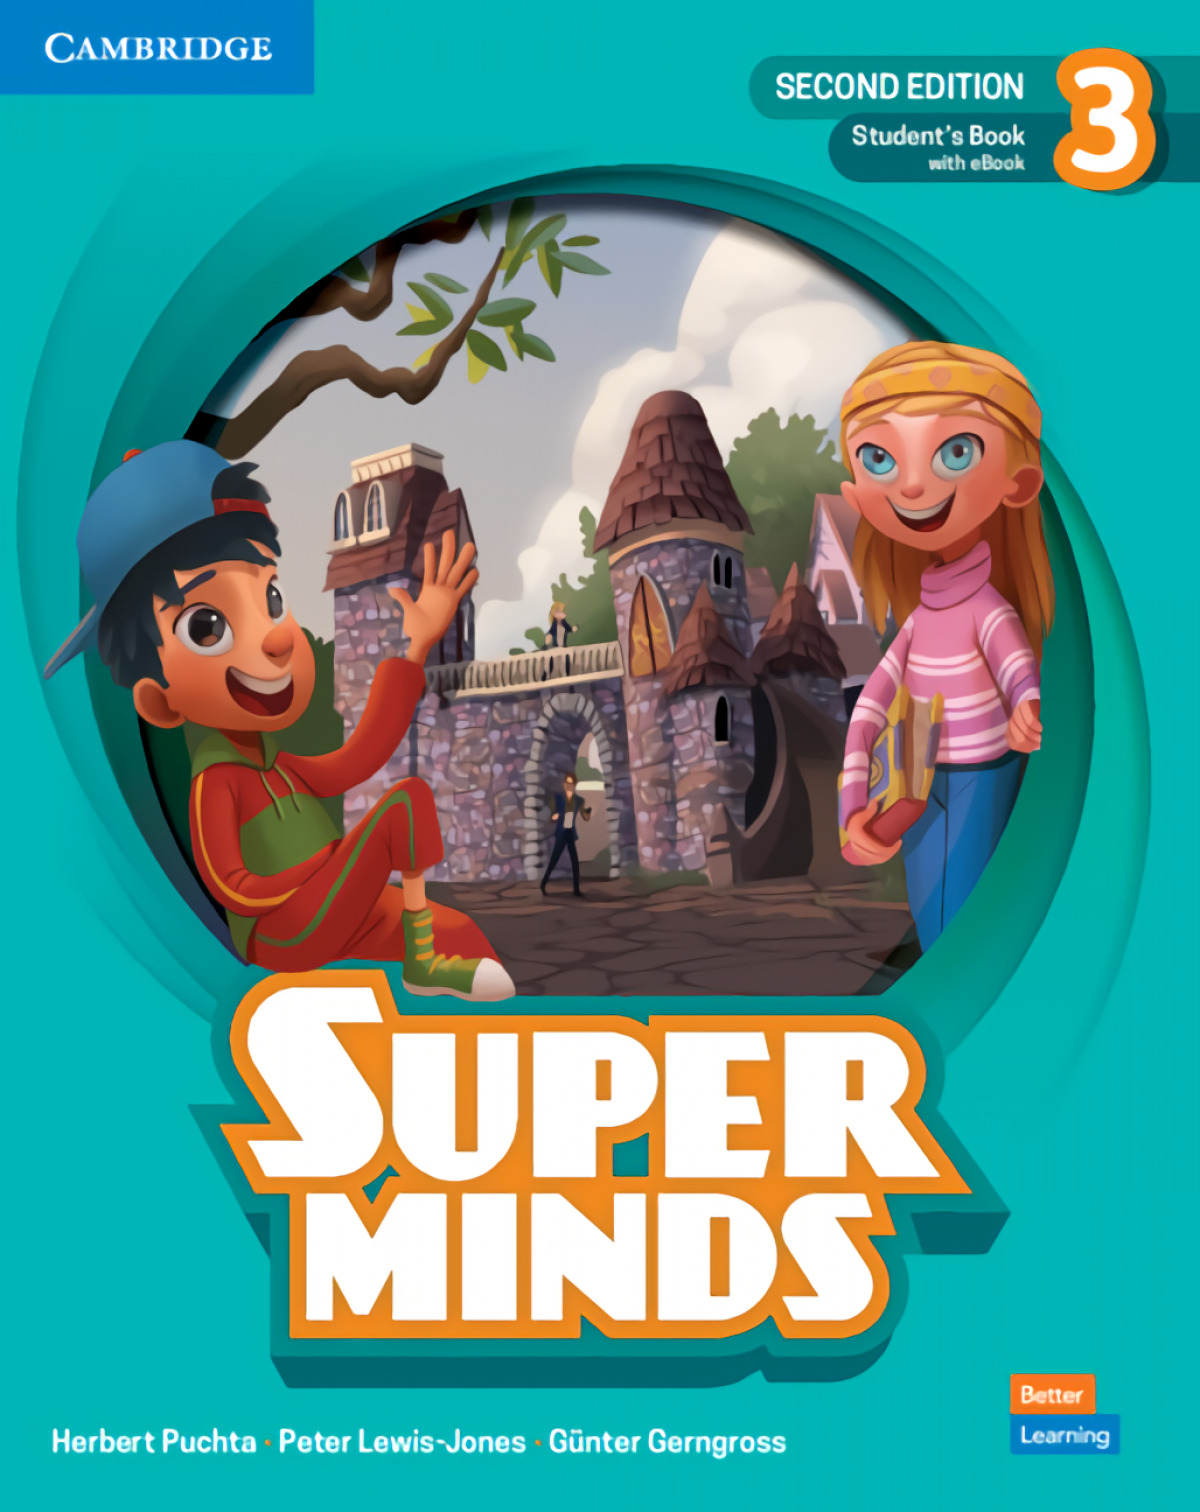 English　Book　with　Libreria　Edition　British　Student`s　Super　eBook　Level　Minds　Second　Cies